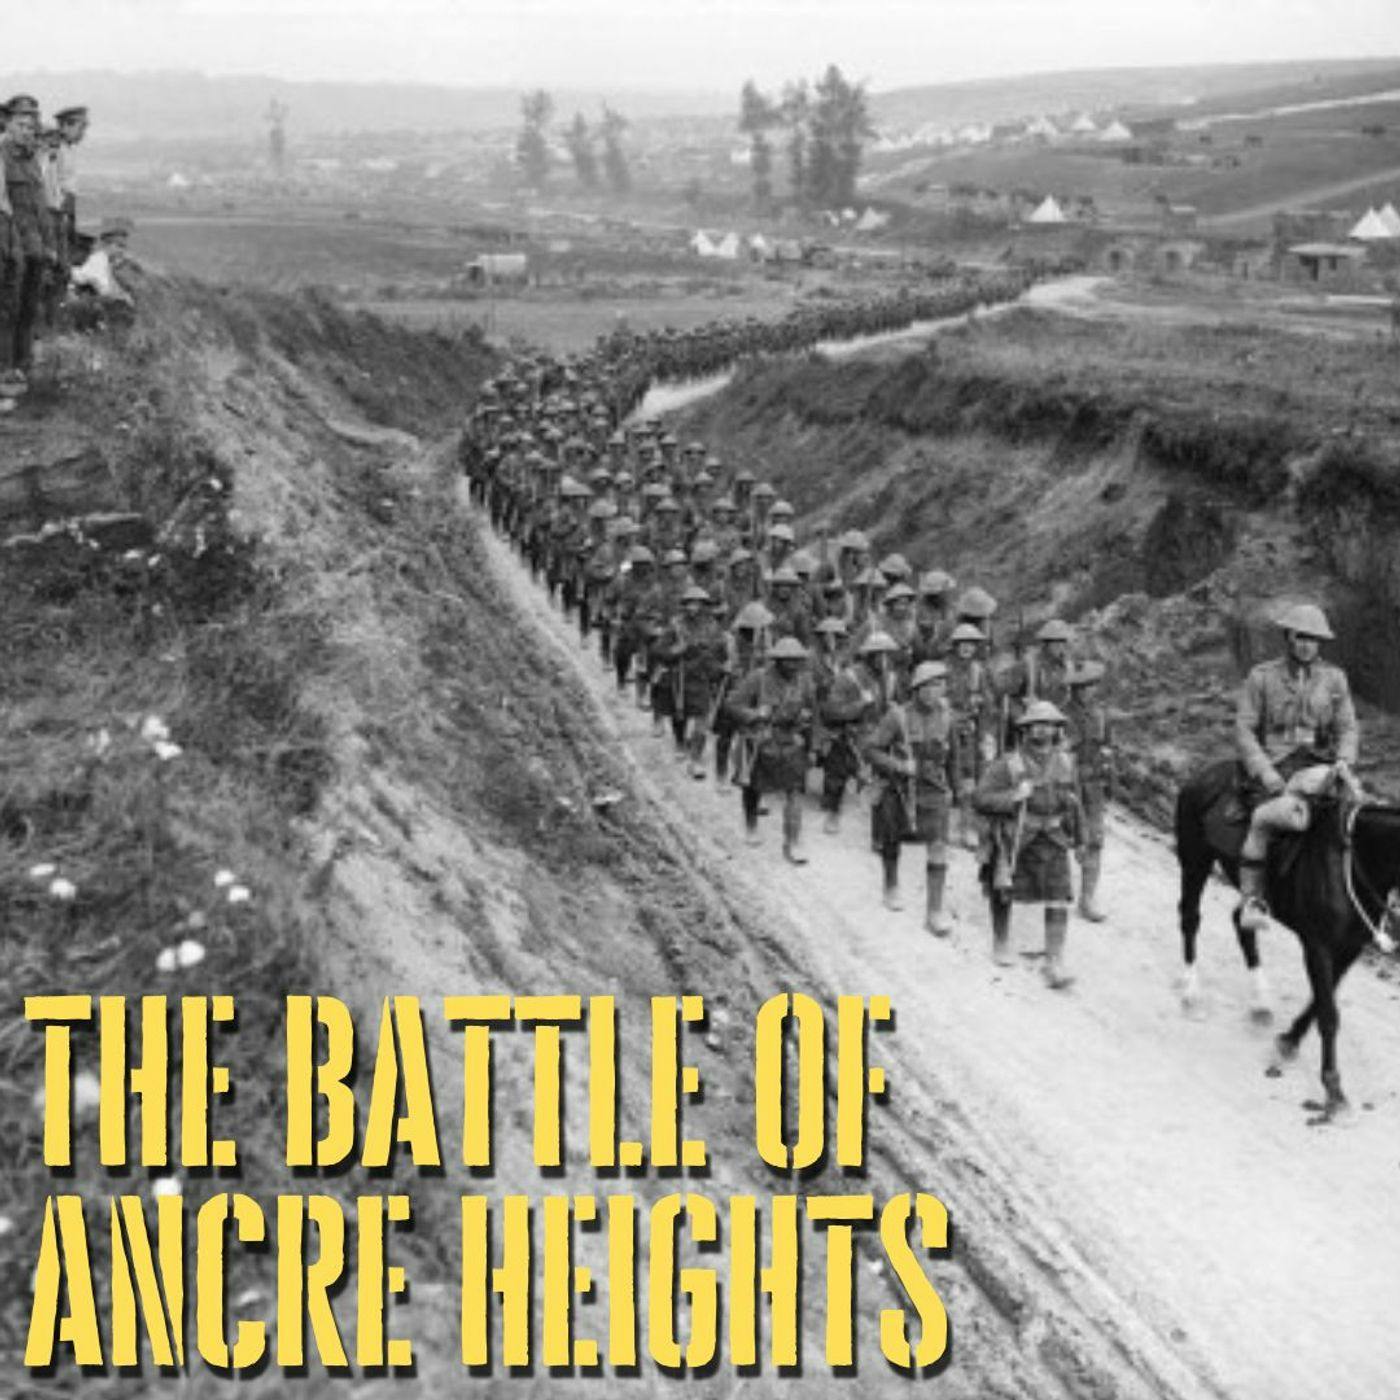 The Battle of Ancre